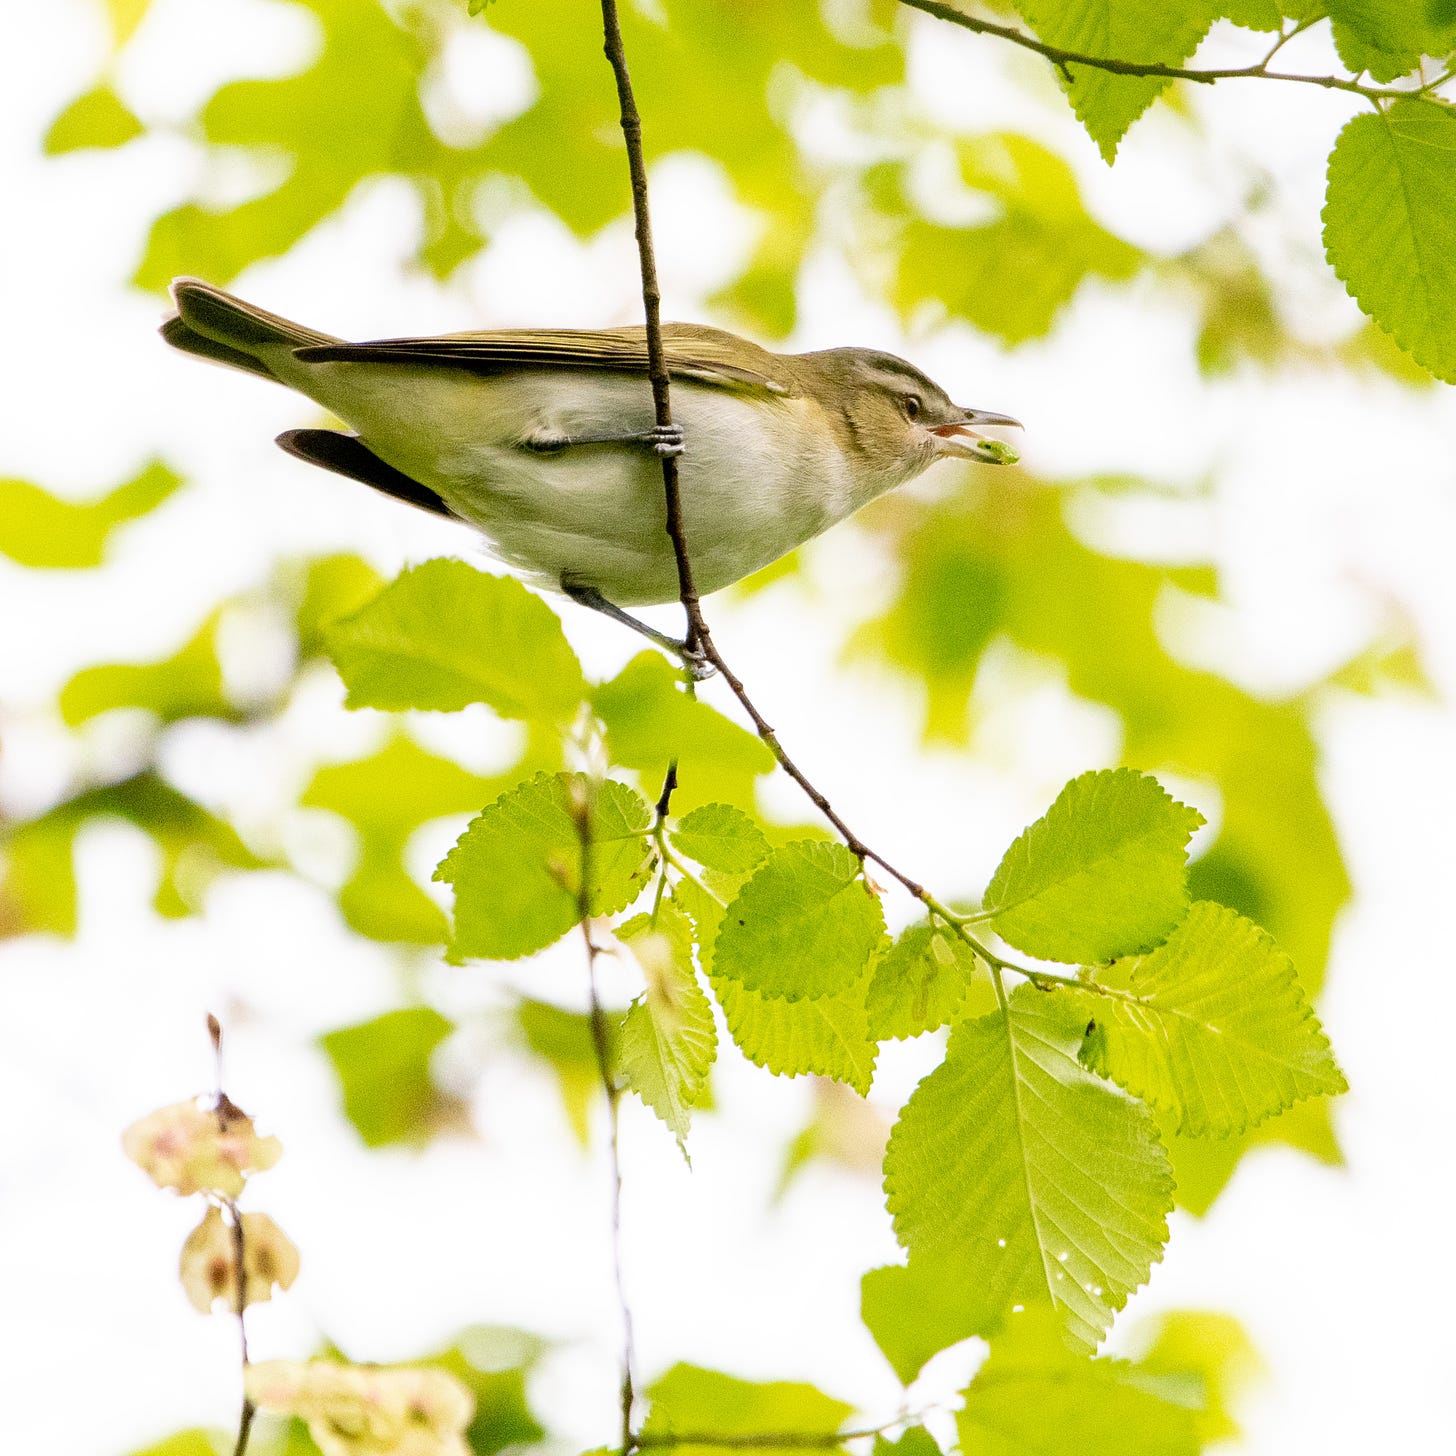 A red-eyed vireo swallowing a green caterpillar